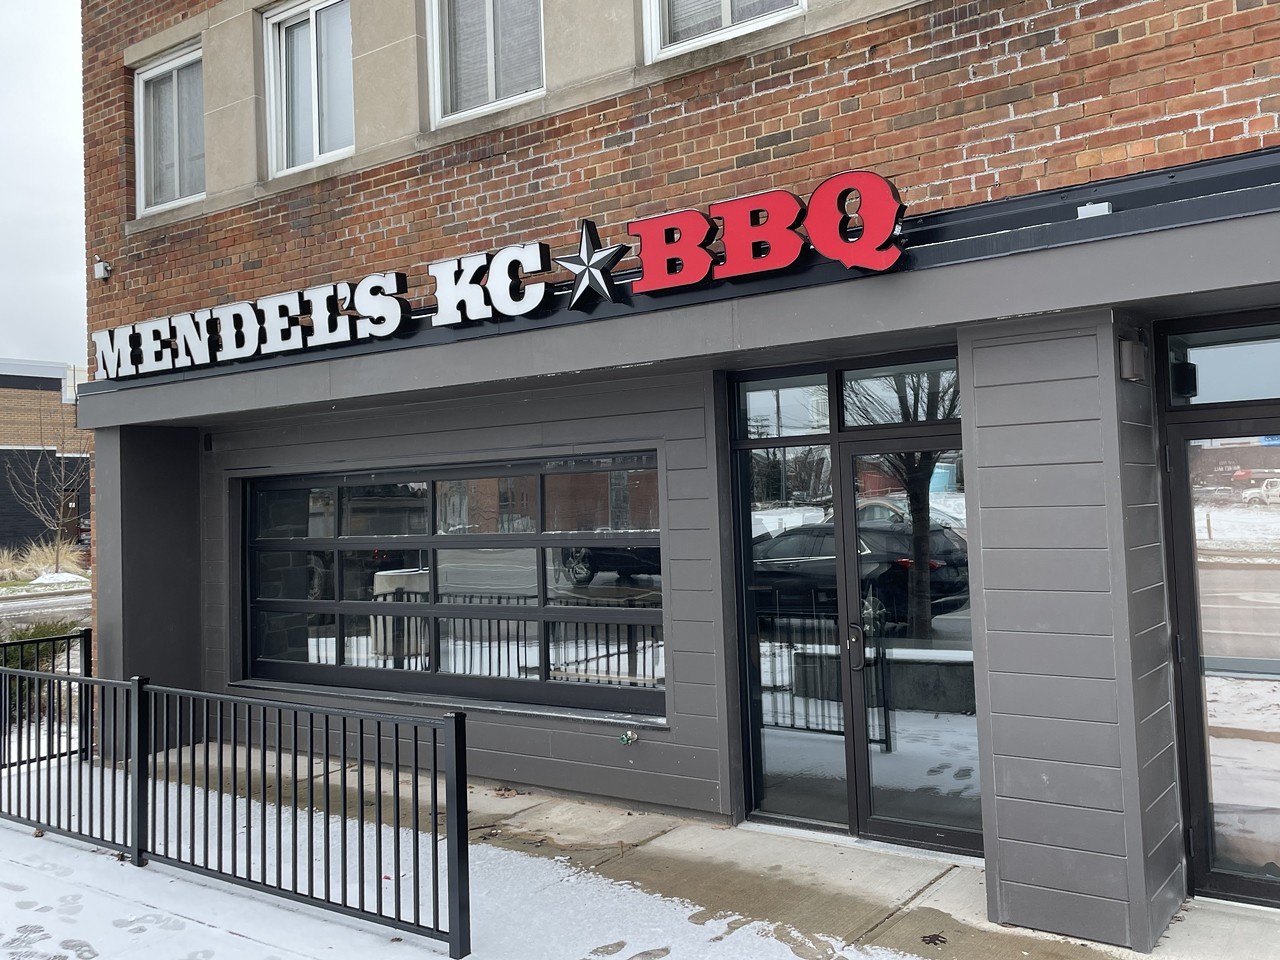 Mendel's Kansas City BBQ
20314 Chagrin Blvd, Shaker Heights
Like his Miami restaurant, Mendel’s Backyard BBQ, Mendel Segal is proving that kosher and barbecue can indeed coexist. Mendel’s Kansas City BBQ opened its doors in Shaker Heights, across Chagrin Boulevard from Van Aken District. The 80-seat restaurant is full-service, but family-friendly. And with items like brisket, smoked pastrami, giant beef ribs, beef back ribs, smoked veal brisket, lamb ribs, smoked turkey, burnt ends and smoked chicken, few diners will miss the pork.